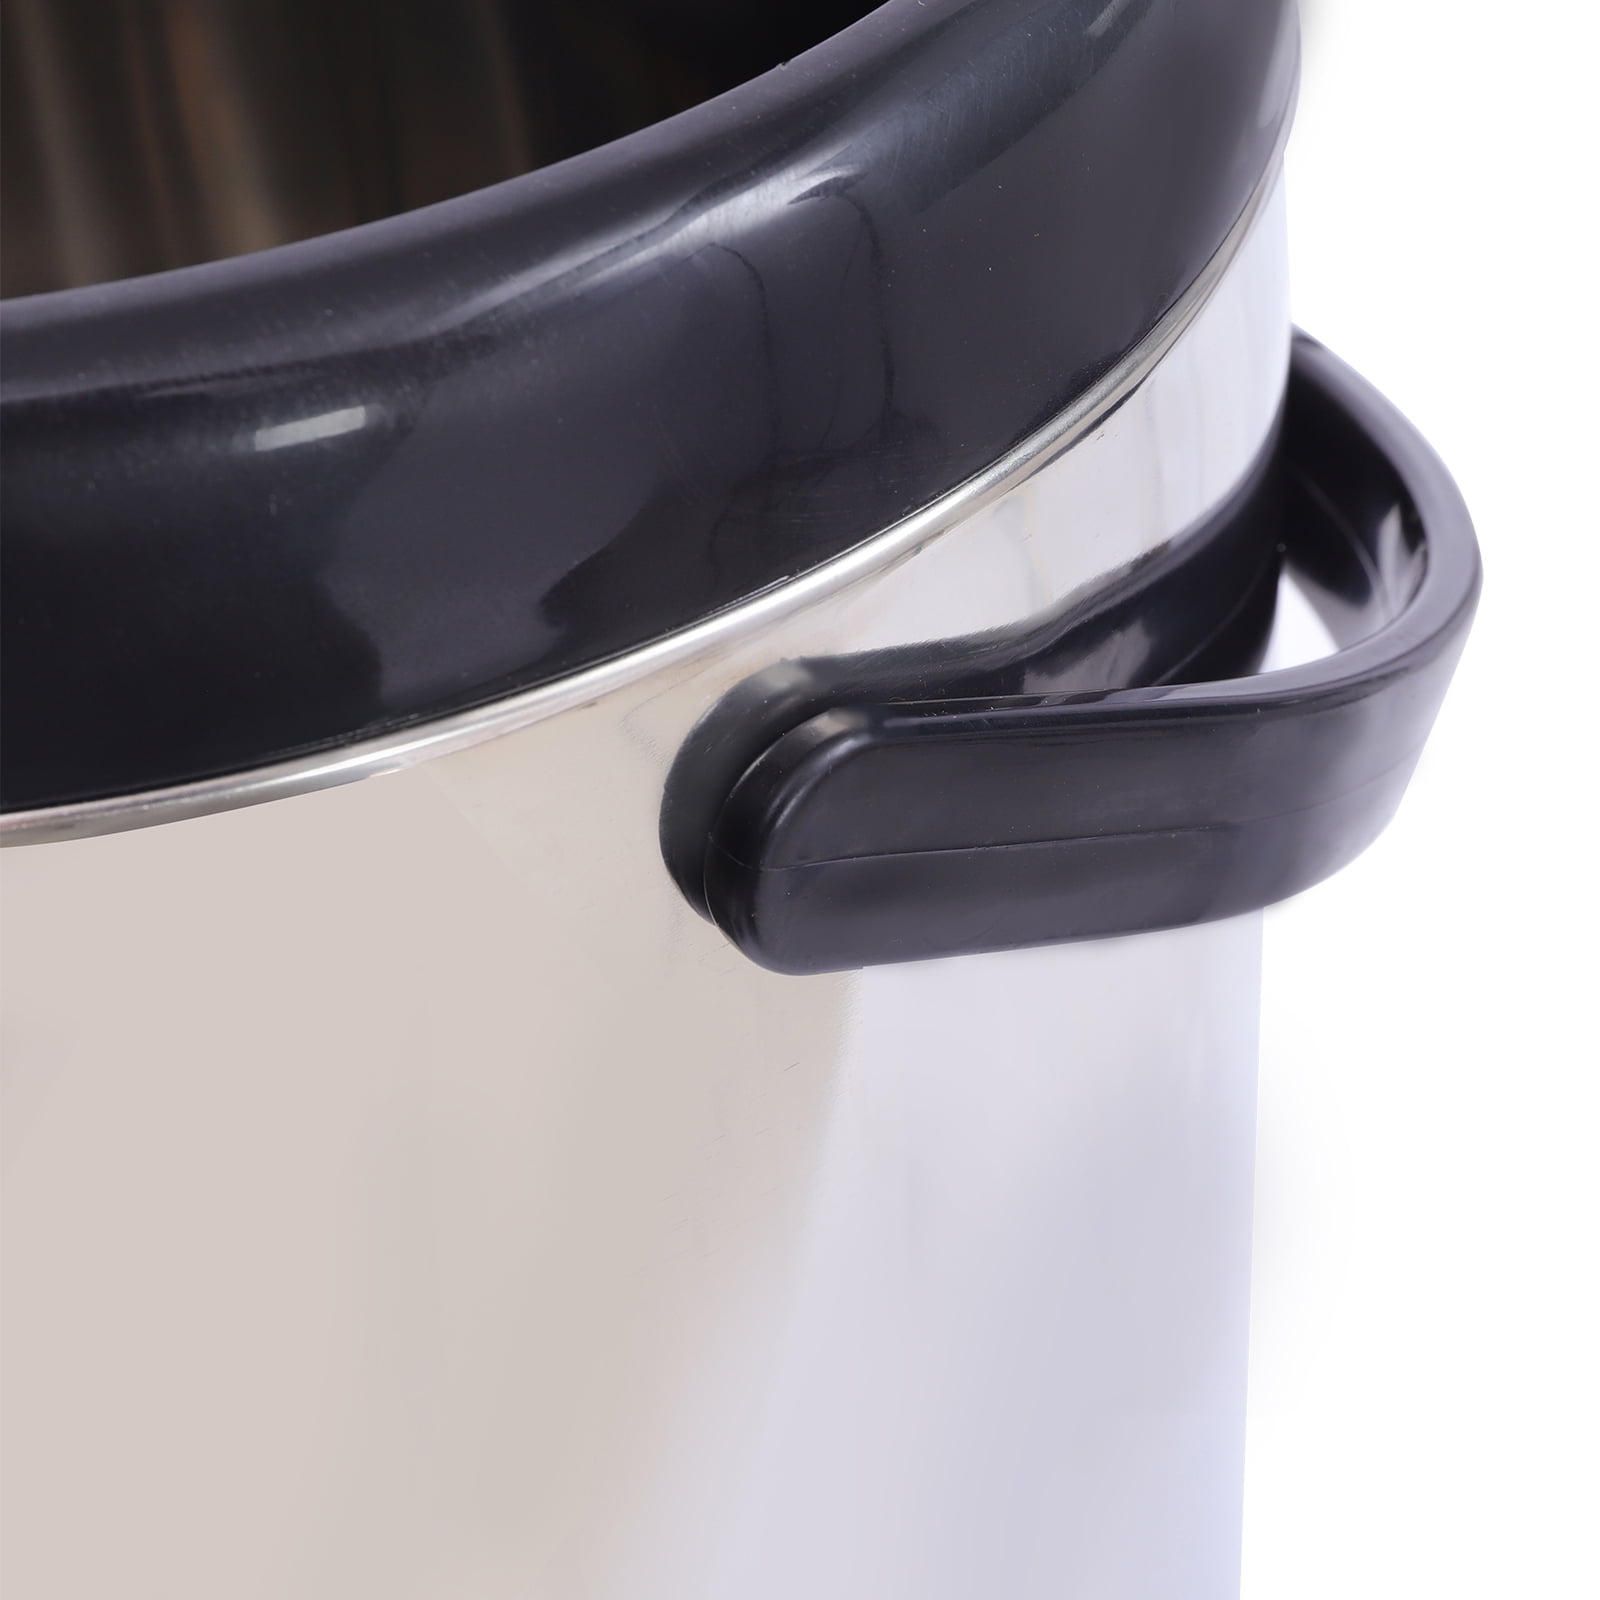 Cold Hot Beverage Dispenser, Stainless Steel Thermo Urn with Spigot, Milk  Tea Juice Drink Insulated Bucket Dispenser for Party BBQ Family Gathering